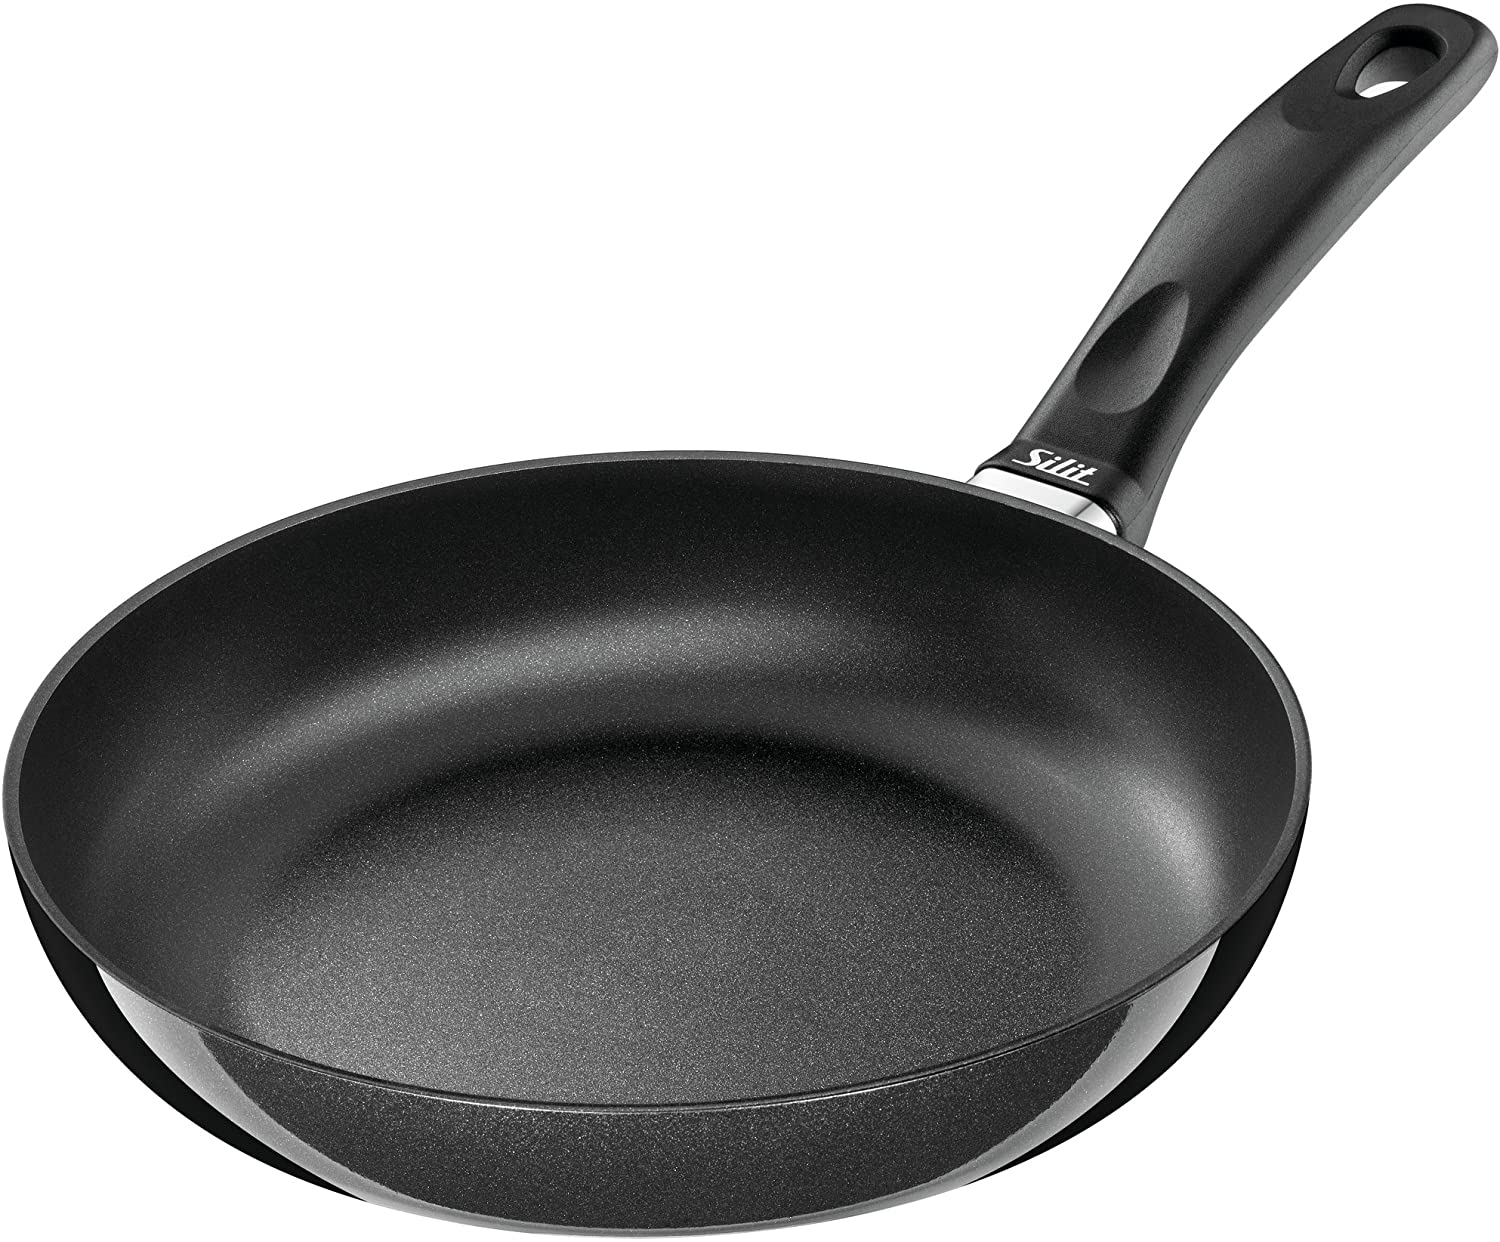 Silit Futura 24 cm Die-Cast Aluminium Coated Frying Pan with Flame Protection Plastic Handle